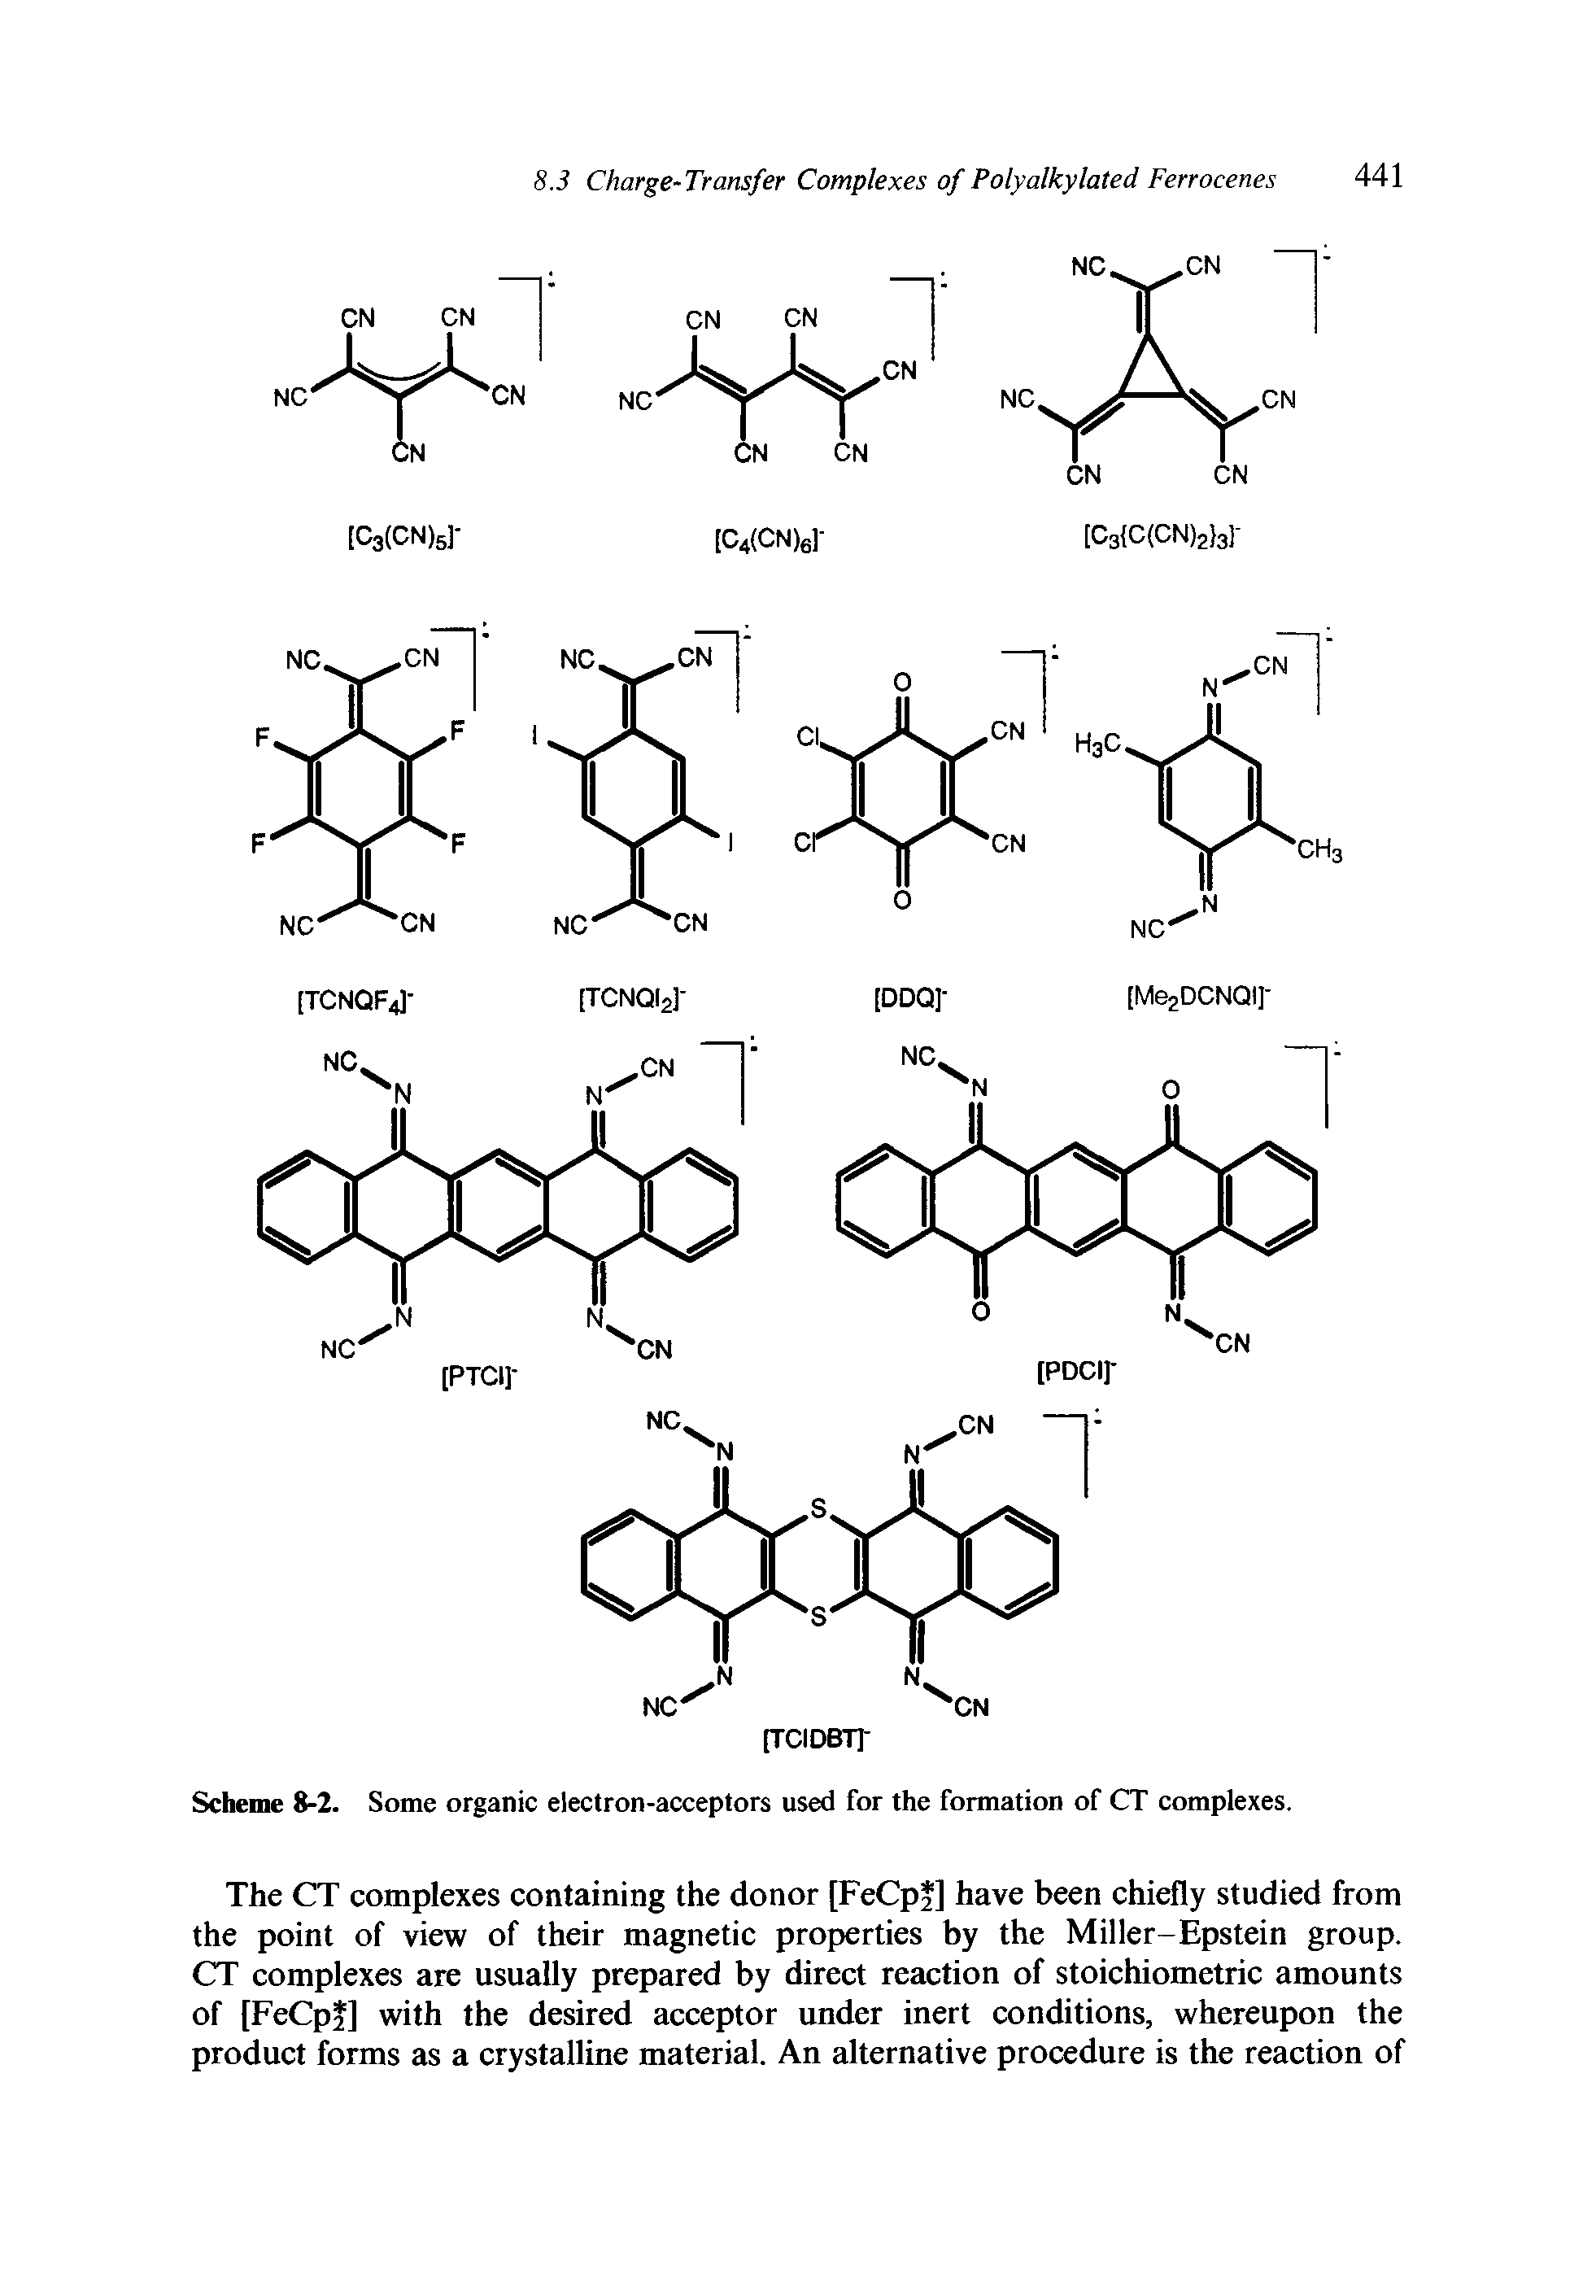 Scheme 8-2. Some organic electron-acceptors used for the formation of CT complexes.